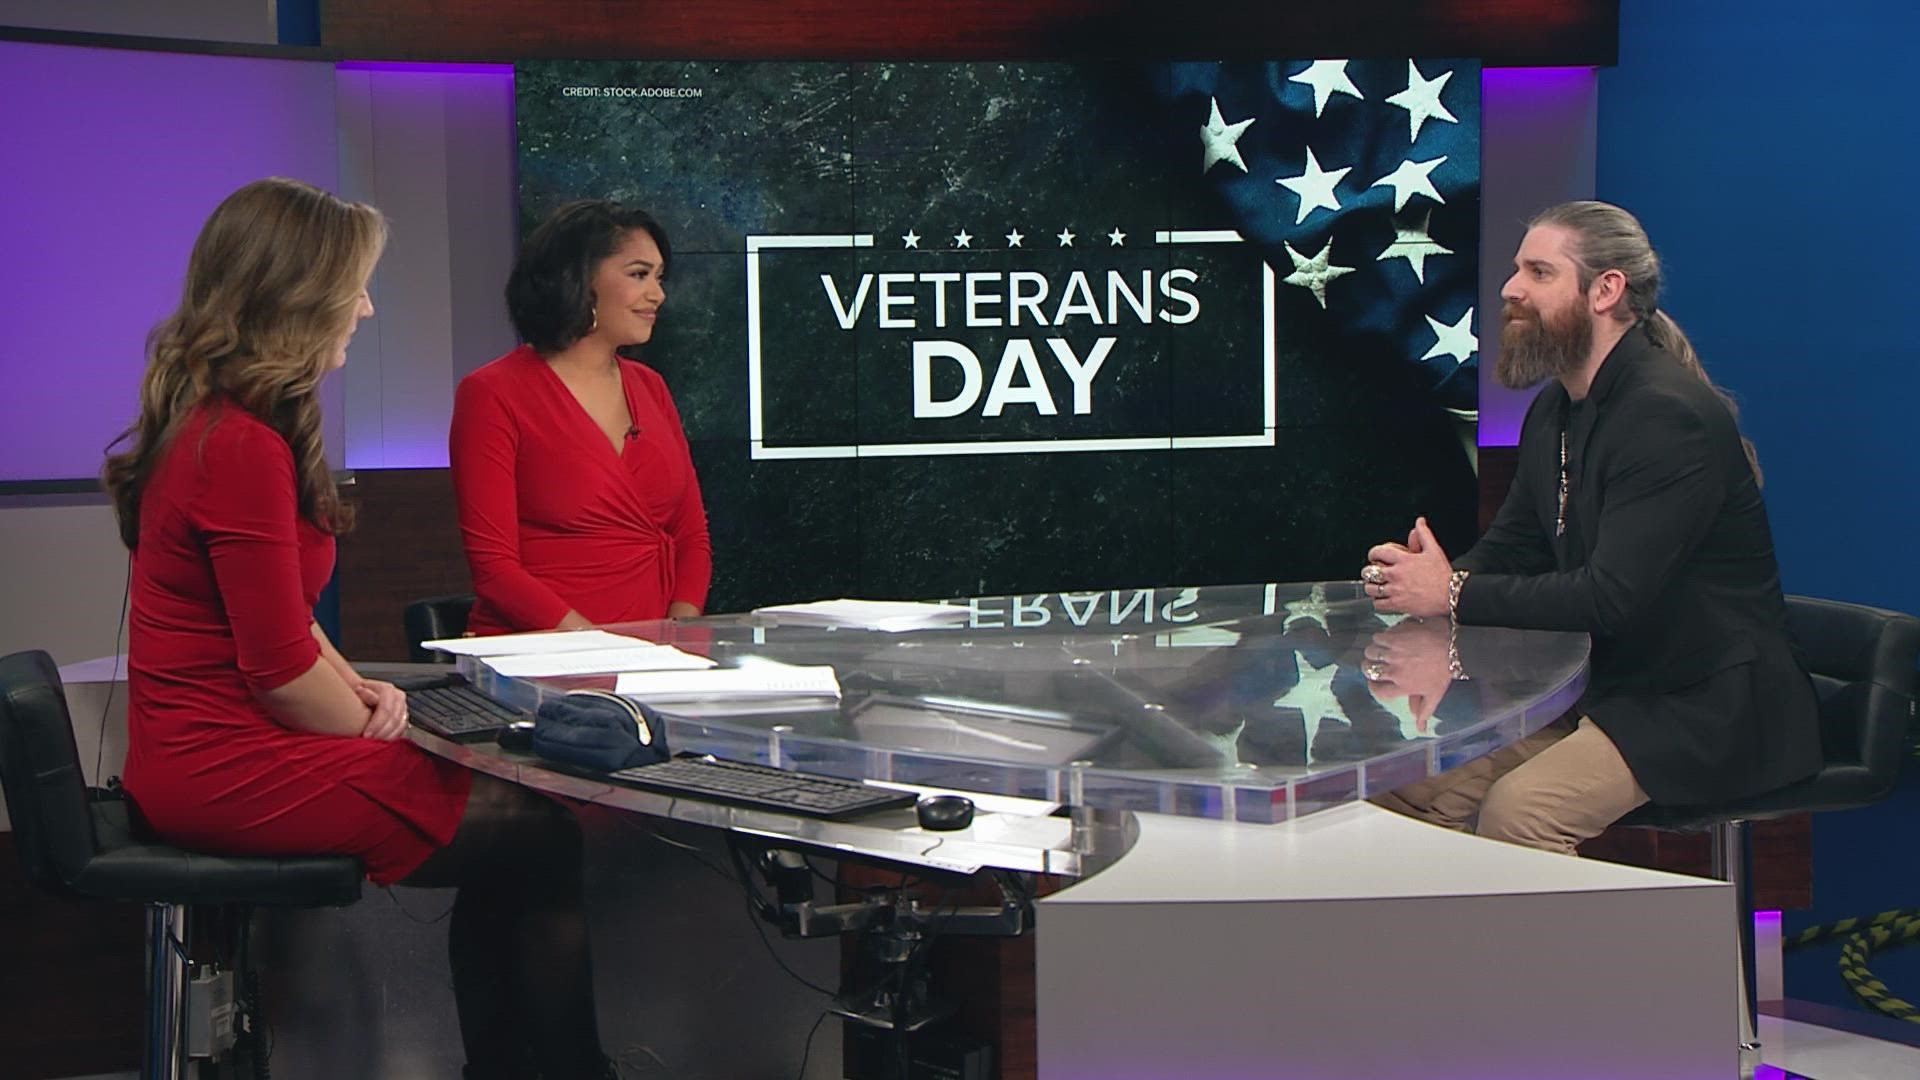 Mental health expert Dr. Eric French joins 9NEWS to discuss the importance of self care for veterans.